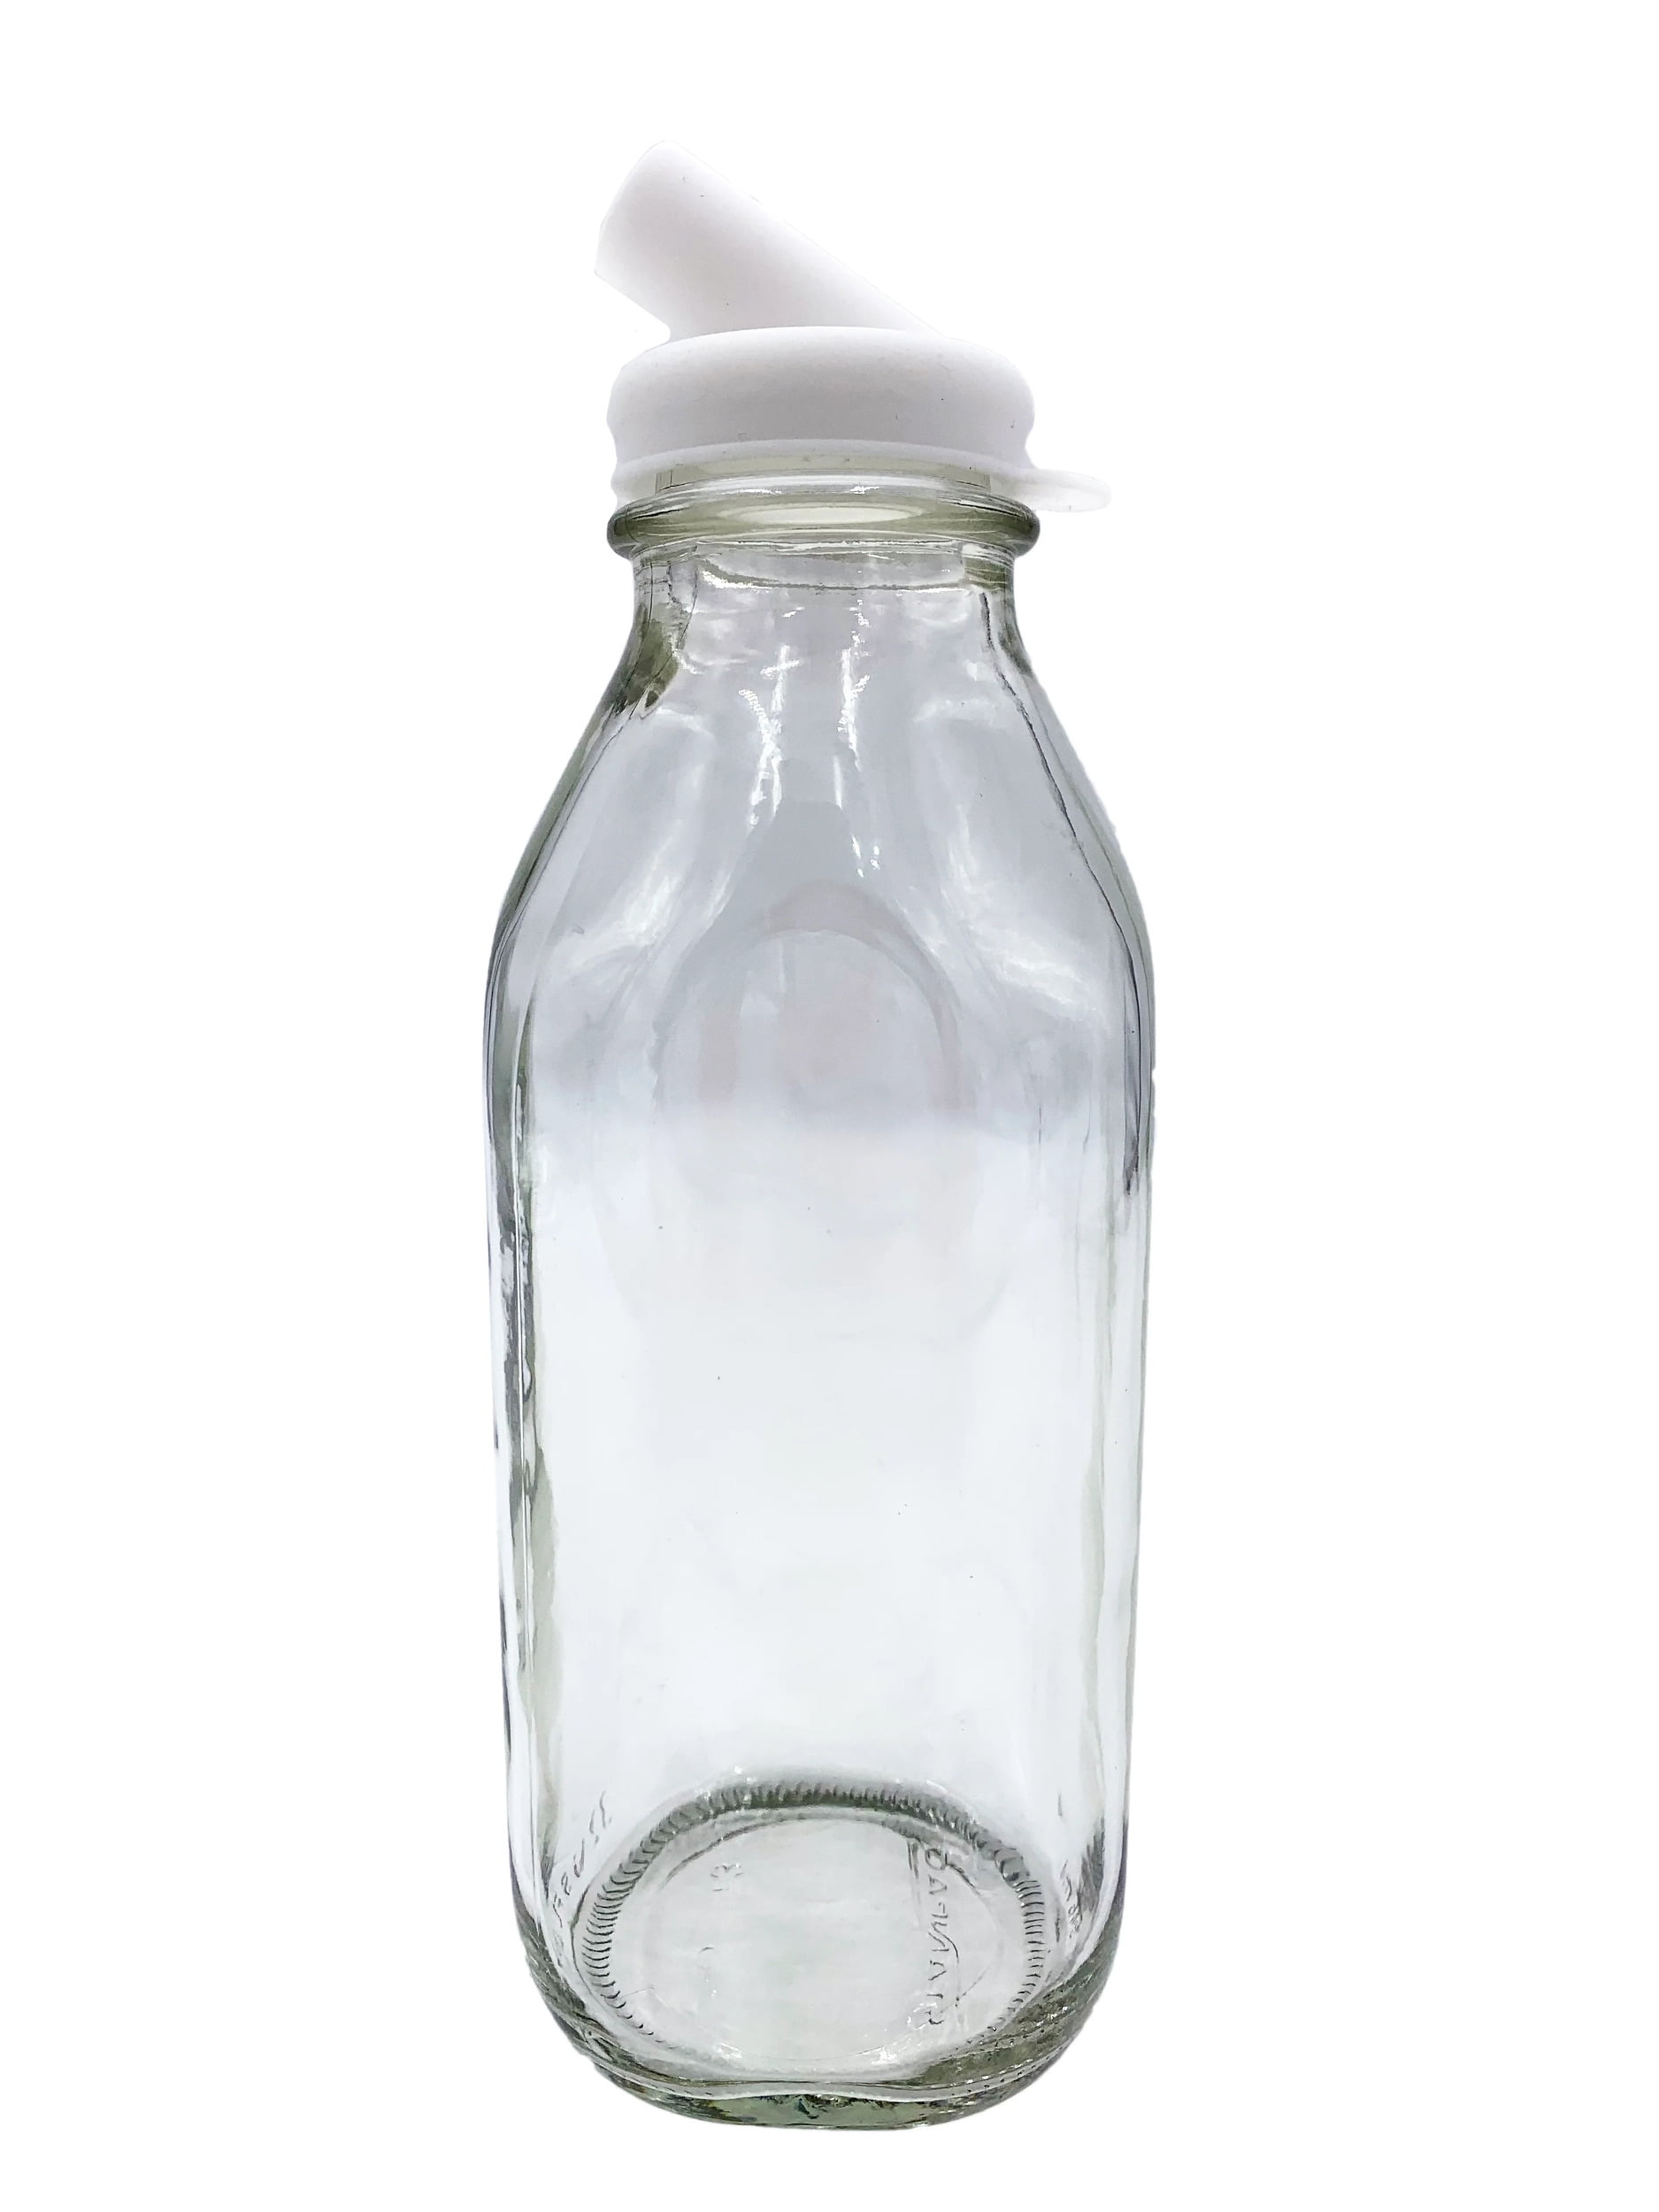 New! Glass Milk Bottle with Lid and Pourer Multi-Pack. 64 Oz Reusable Glass  Bottles with 6 Lids! - Drinkware - New York, New York, Facebook  Marketplace